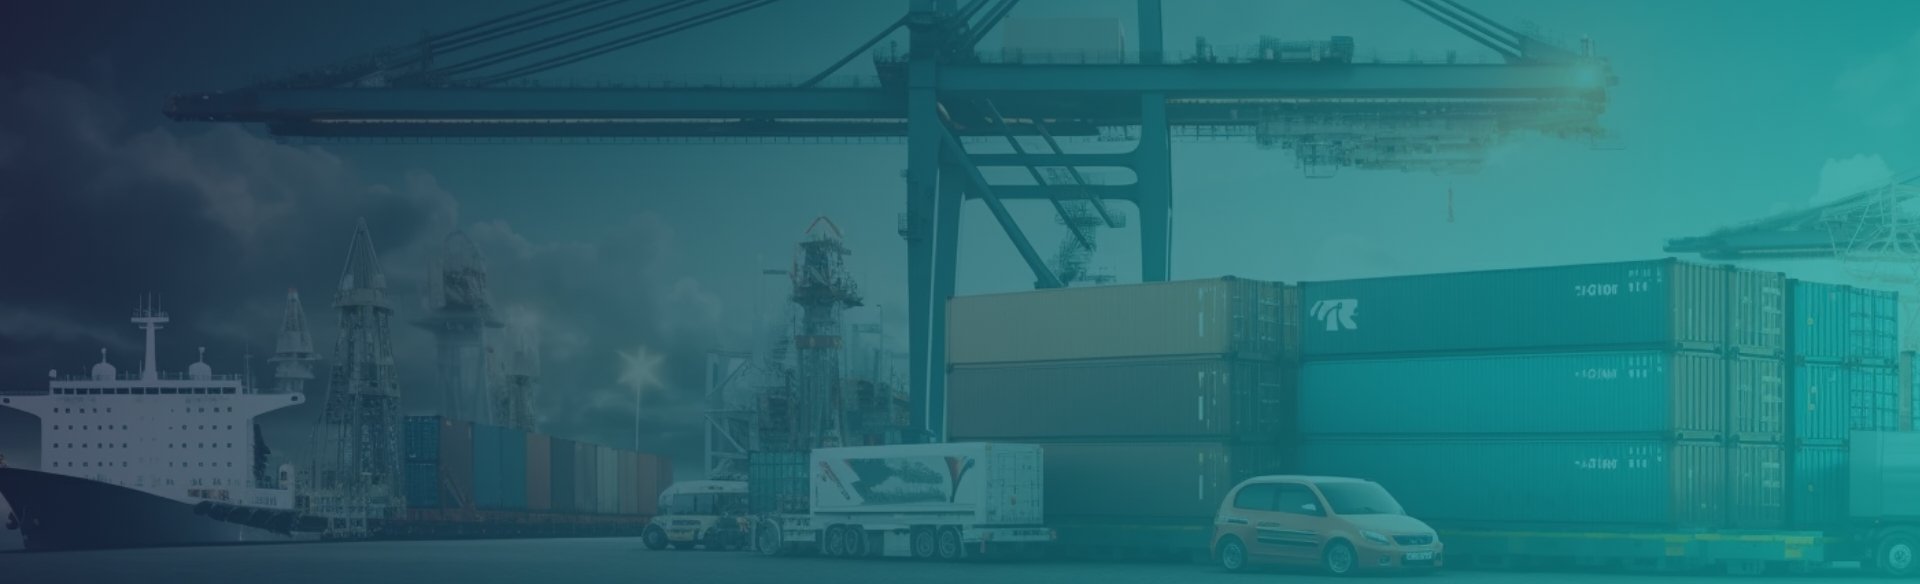 Supply Chain Management with cranes, trucks, and cargo at a port